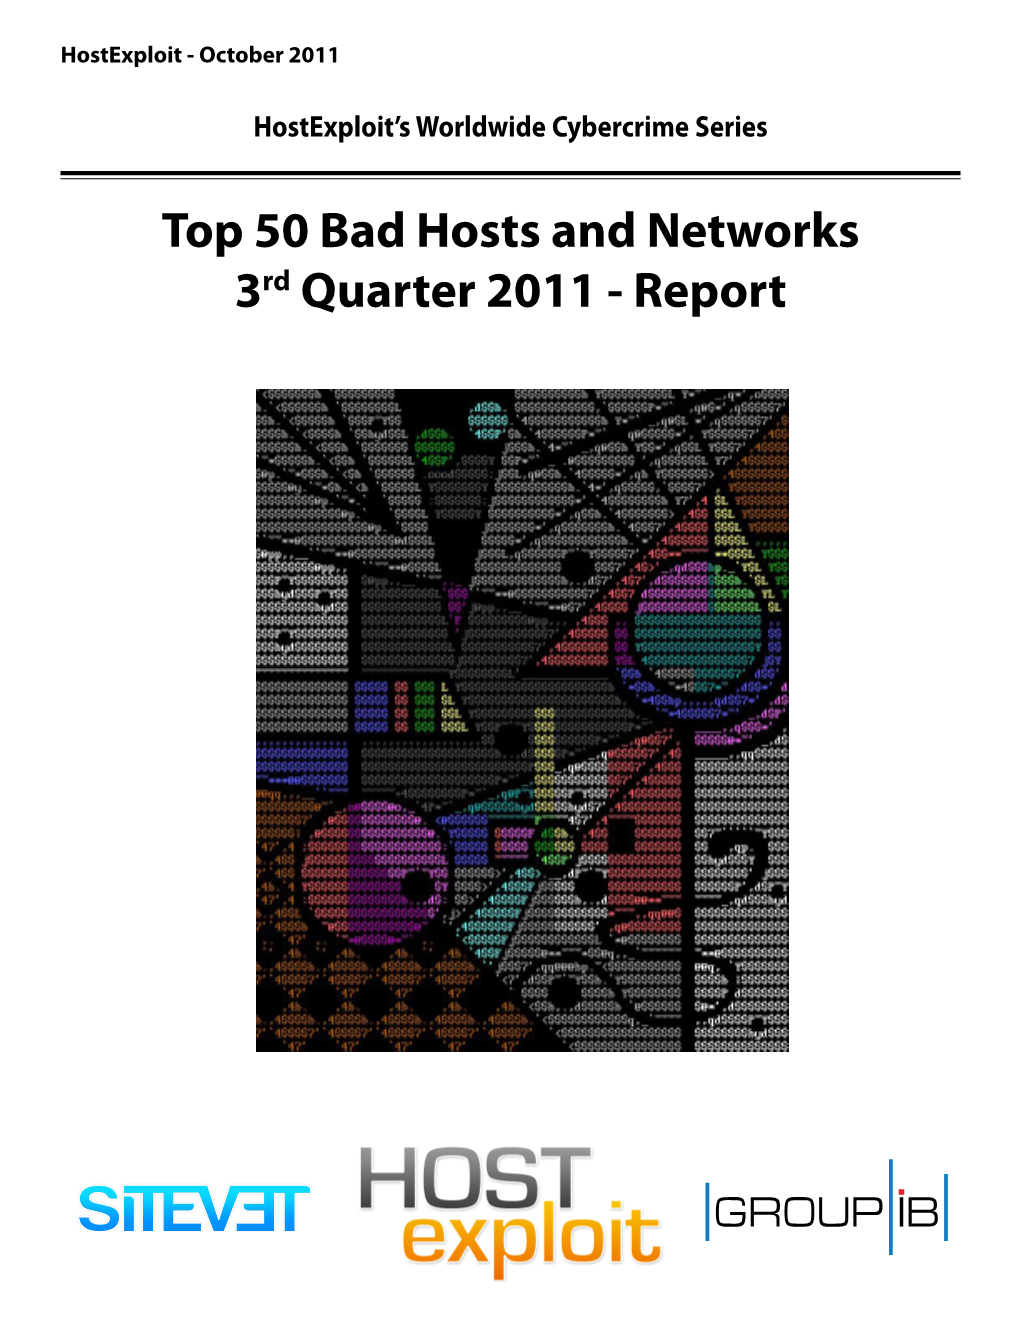 Top 50 Bad Hosts and Networks 3Rd Quarter 2011 - Report Table of Contents